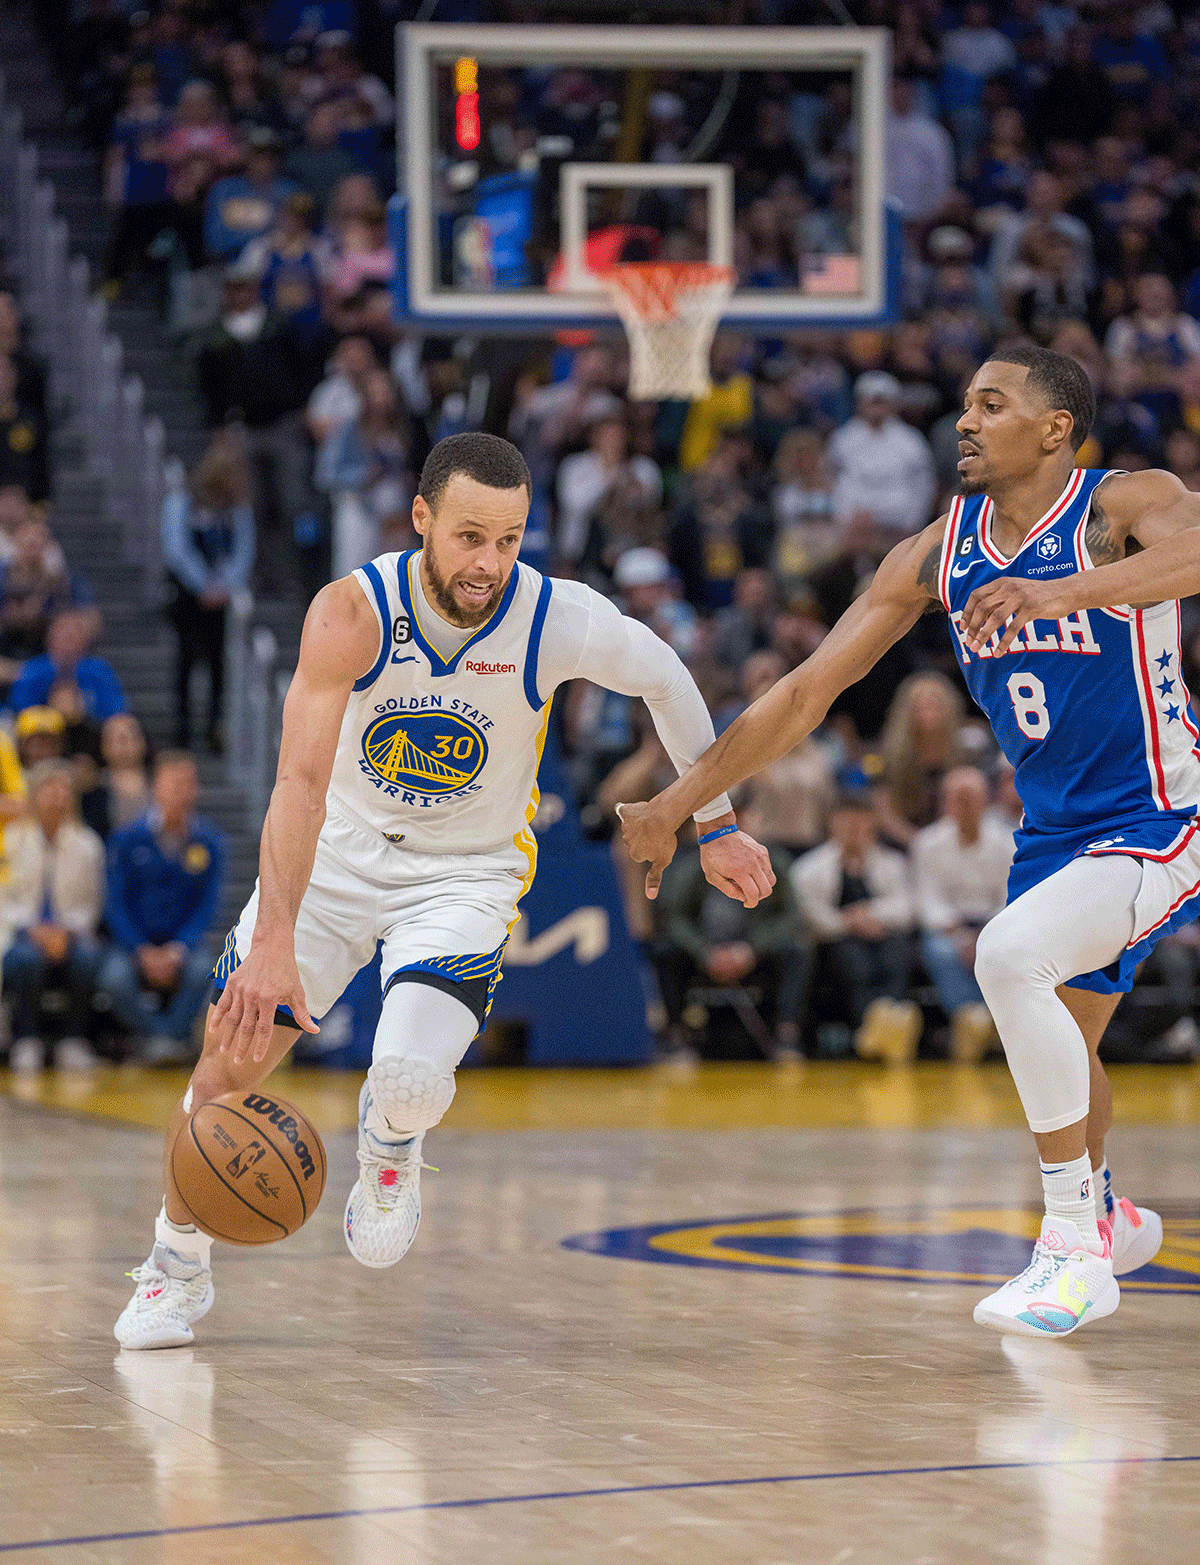 Golden State Warriors guard Stephen Curry (30) drives to the net against Philadelphia 76ers guard De'Anthony Melton (8) during the fourth quarter of their NBA game at Chase Center in San Francisco, California, on Saturday